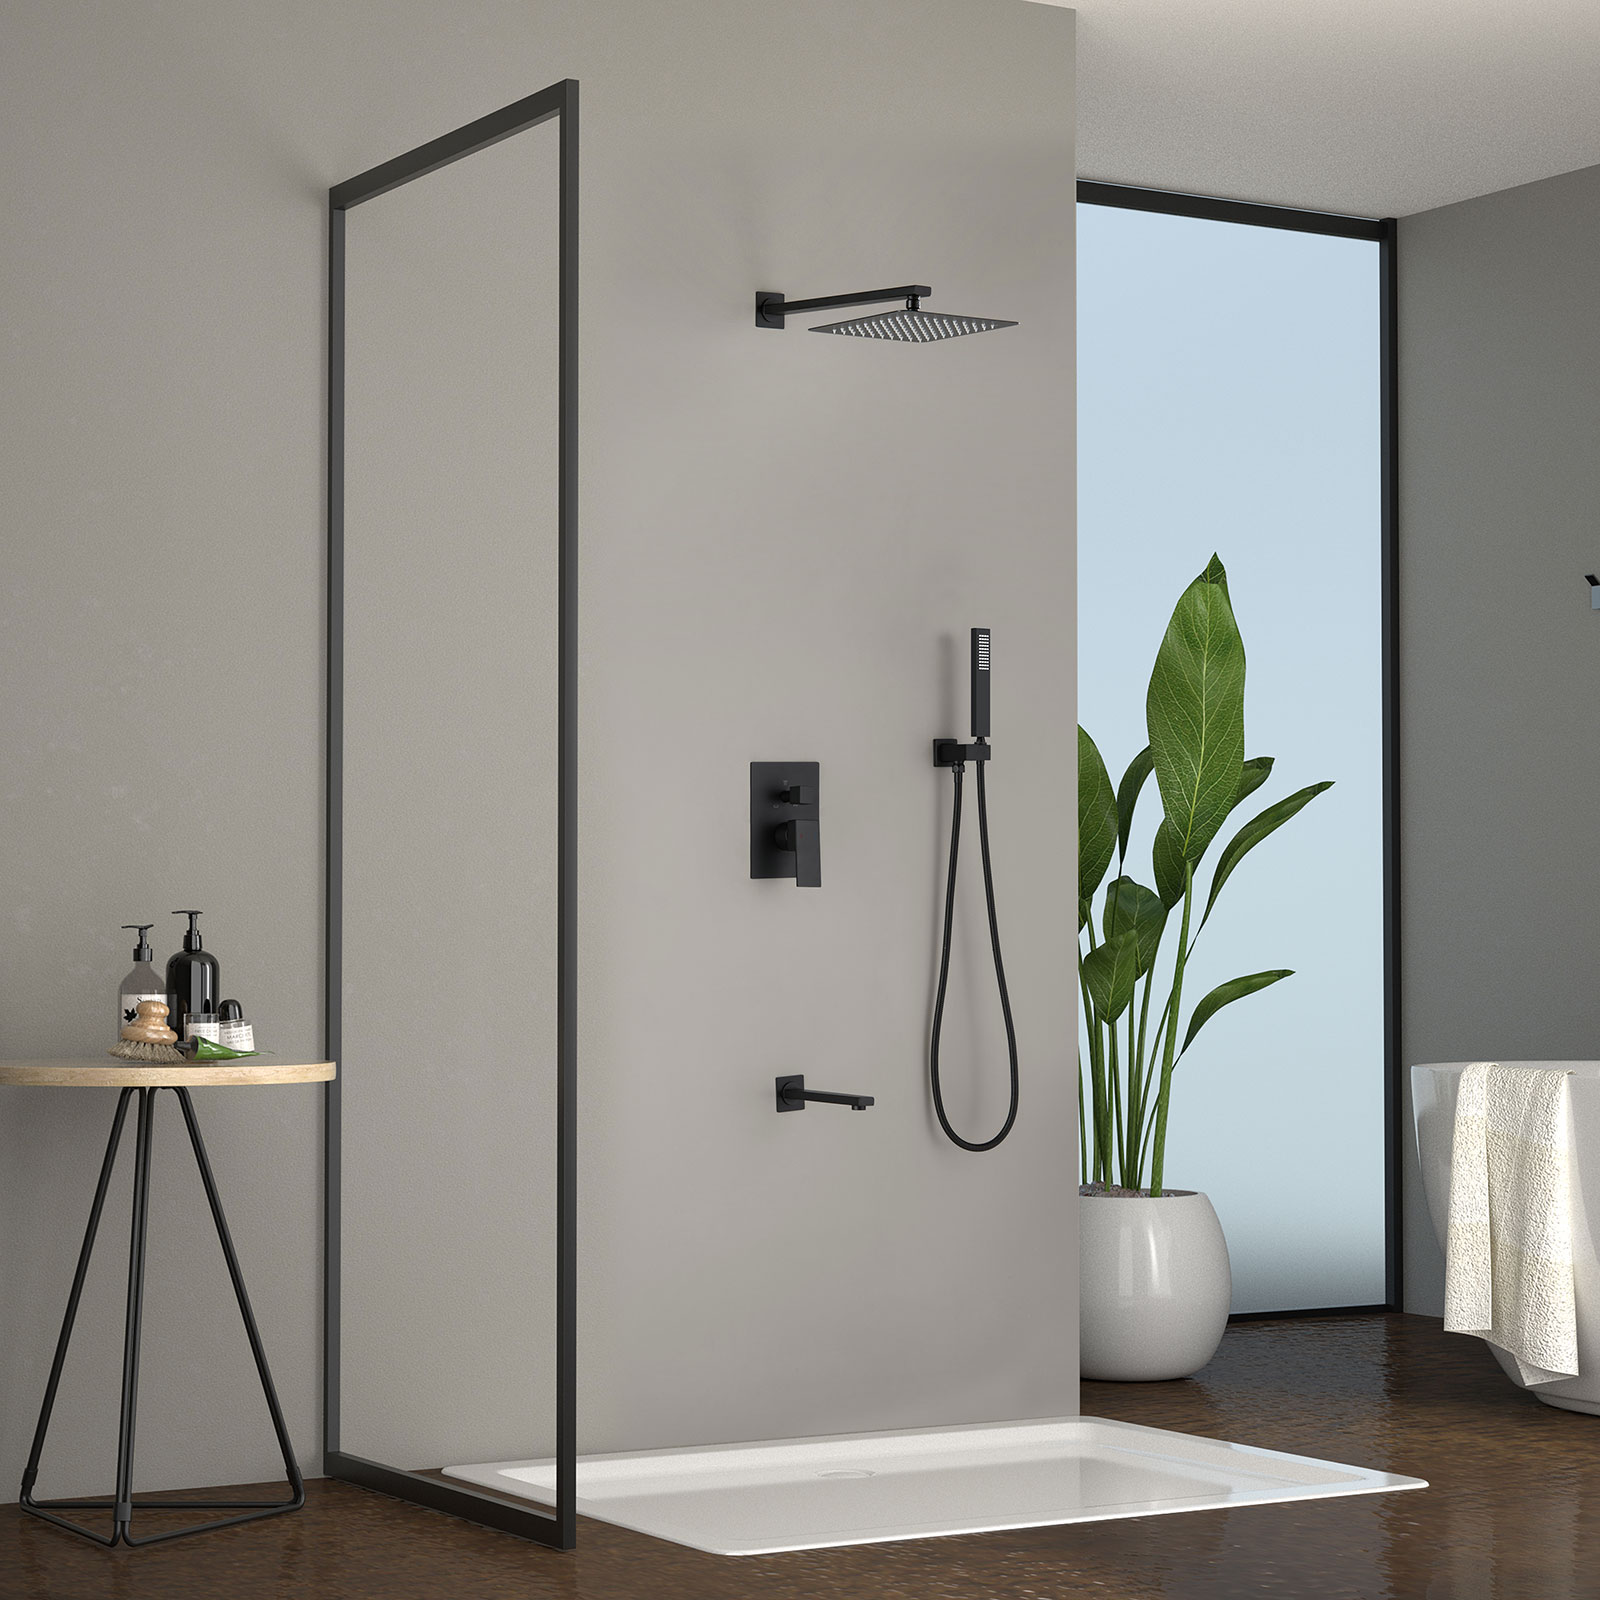 Buy Essence Hardware Trinity River Shower System with Rainfall Shower ...